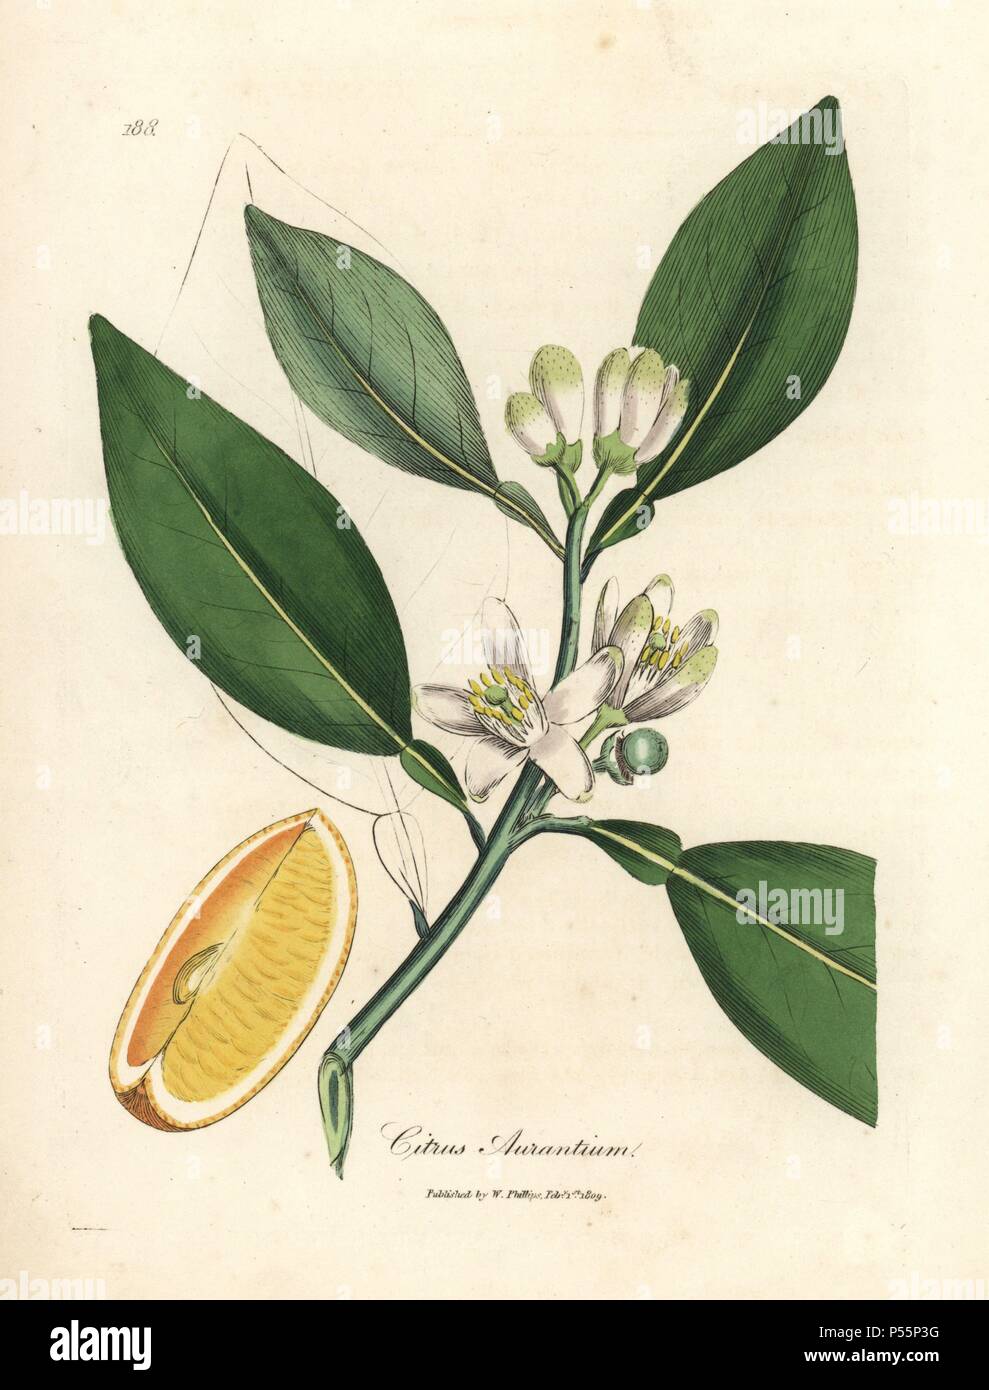 White blossom and ripe fruit segment of the orange tree, Citrus aurantium. Handcolored copperplate engraving from a botanical illustration by James Sowerby from William Woodville and Sir William Jackson Hooker's 'Medical Botany' 1832. The tireless Sowerby (1757-1822) drew over 2,500 plants for Smith's mammoth 'English Botany' (1790-1814) and 440 mushrooms for 'Coloured Figures of English Fungi ' (1797) among many other works. Stock Photo